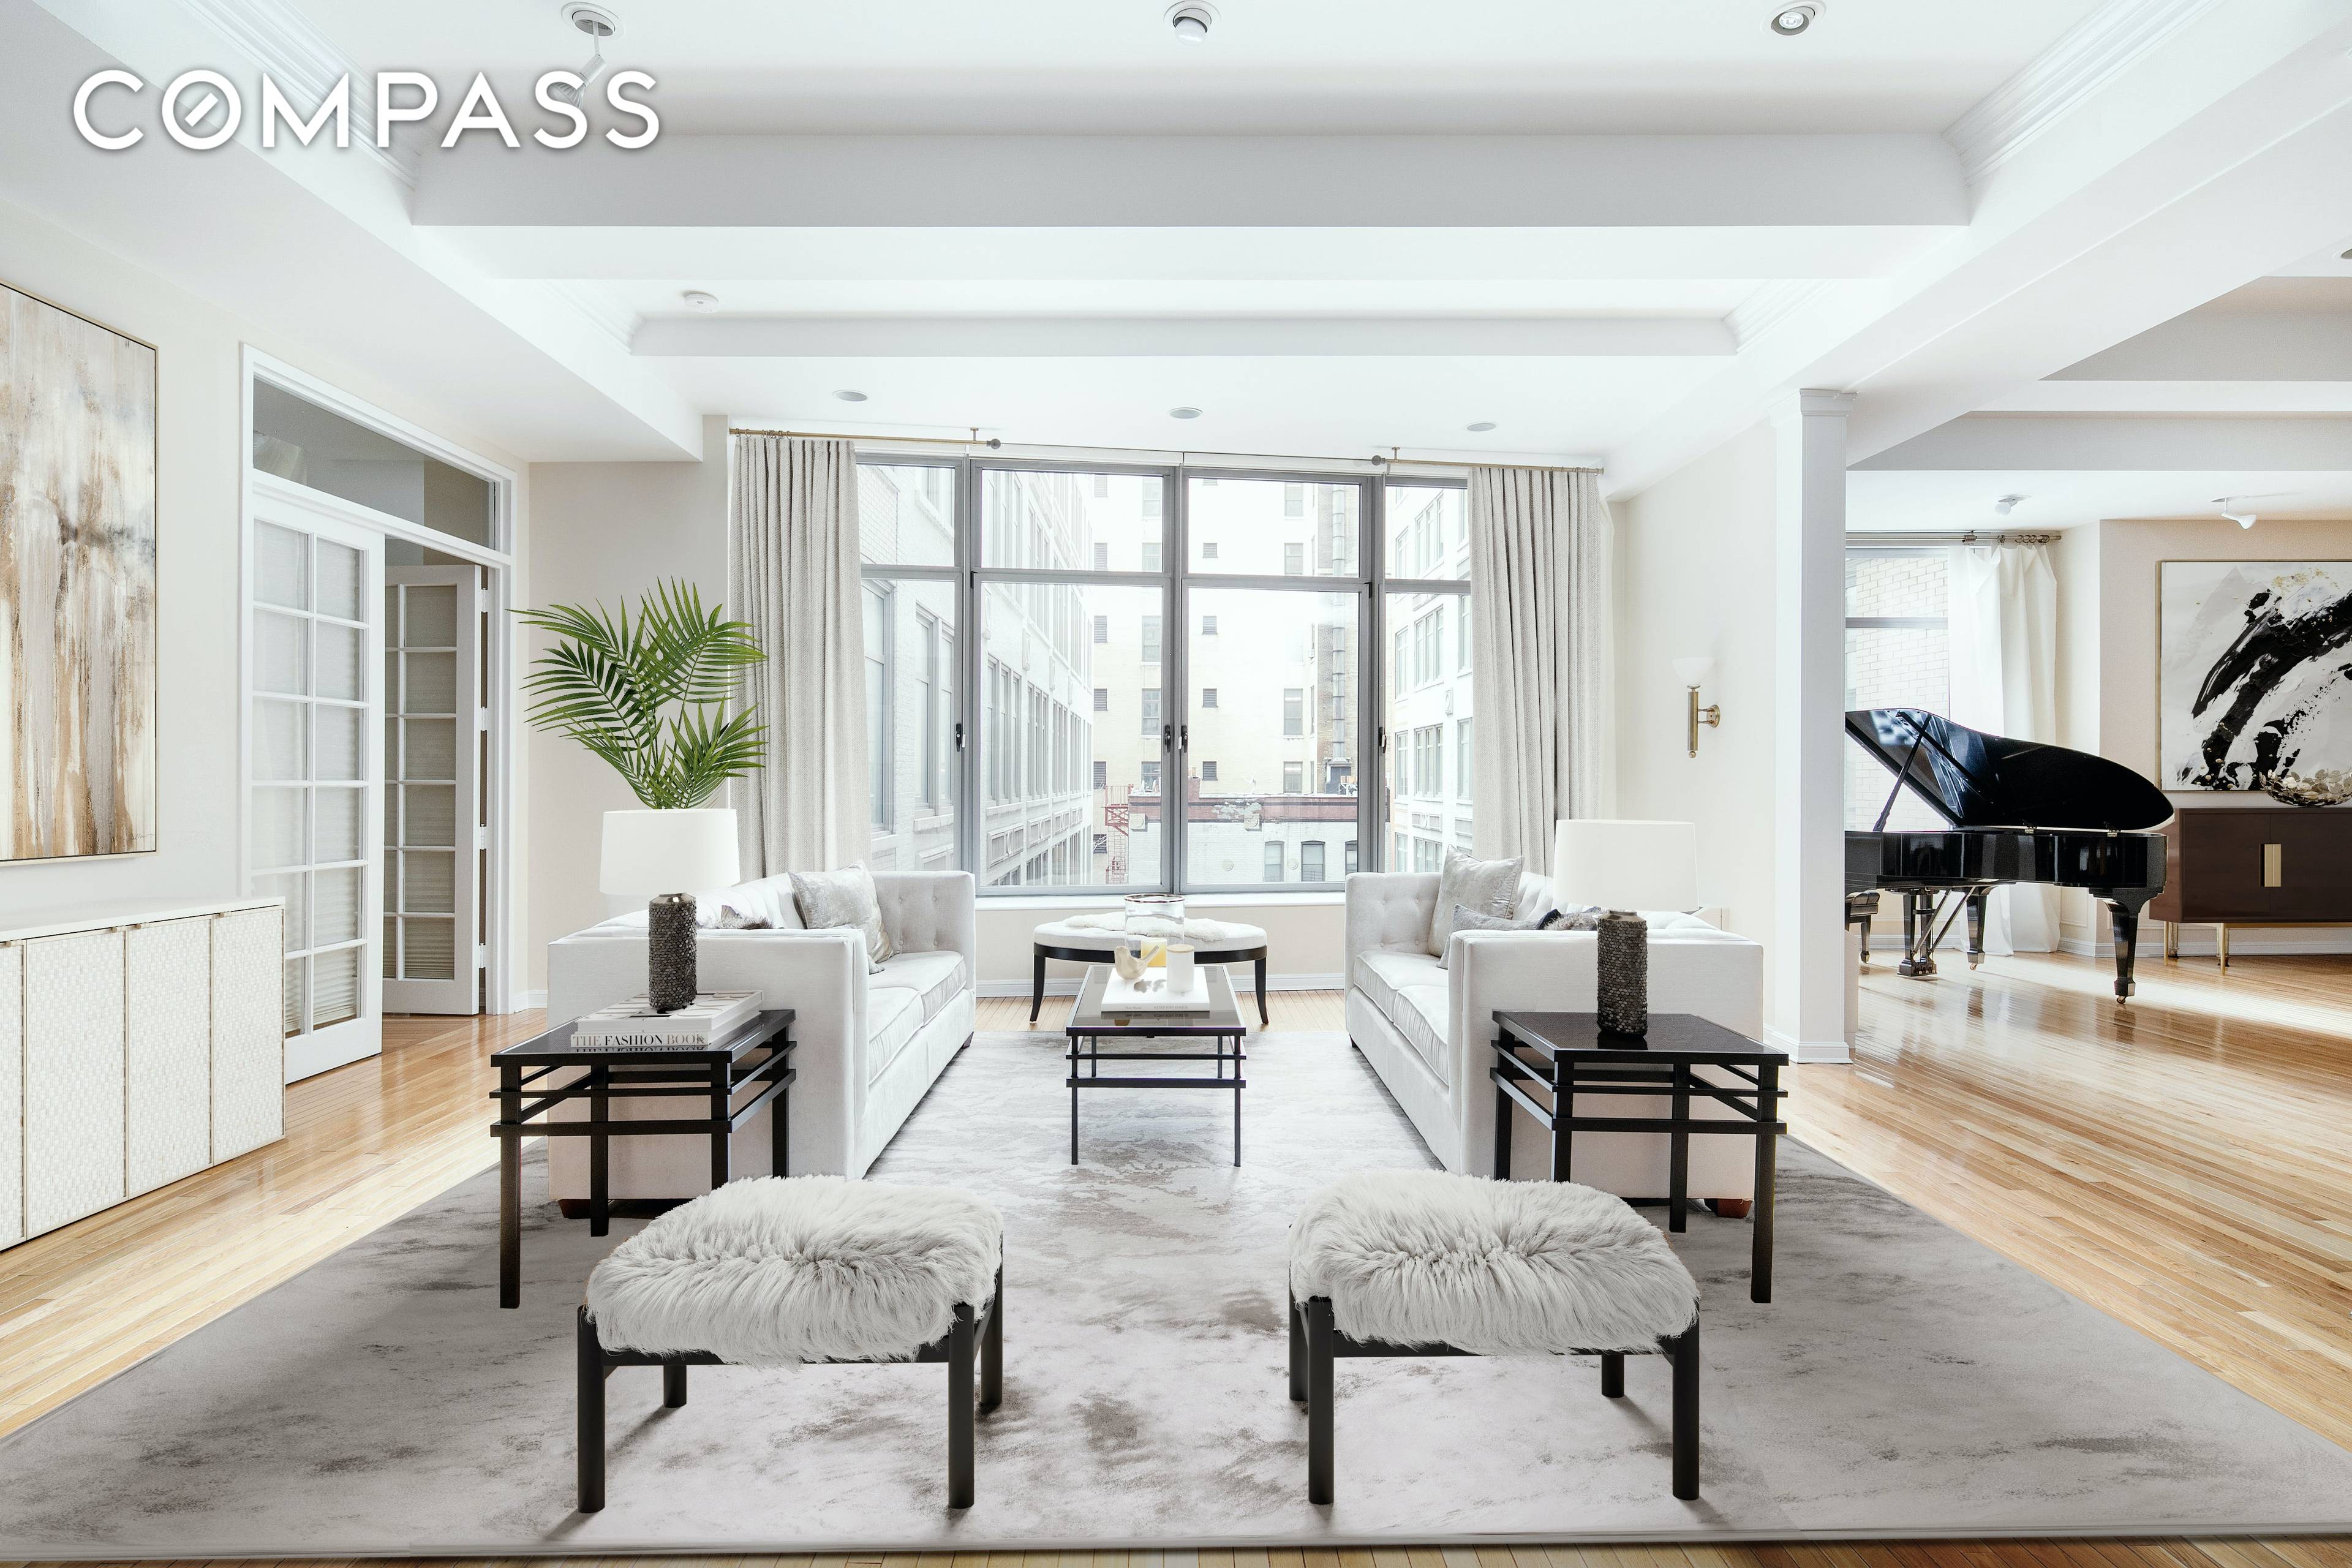 Apartment 6A spans over 2, 000 square feet of grand proportions, floor to ceiling windows, 11 foot beamed ceilings and a flexible layout of 1 3 bedrooms with abundant closet ...